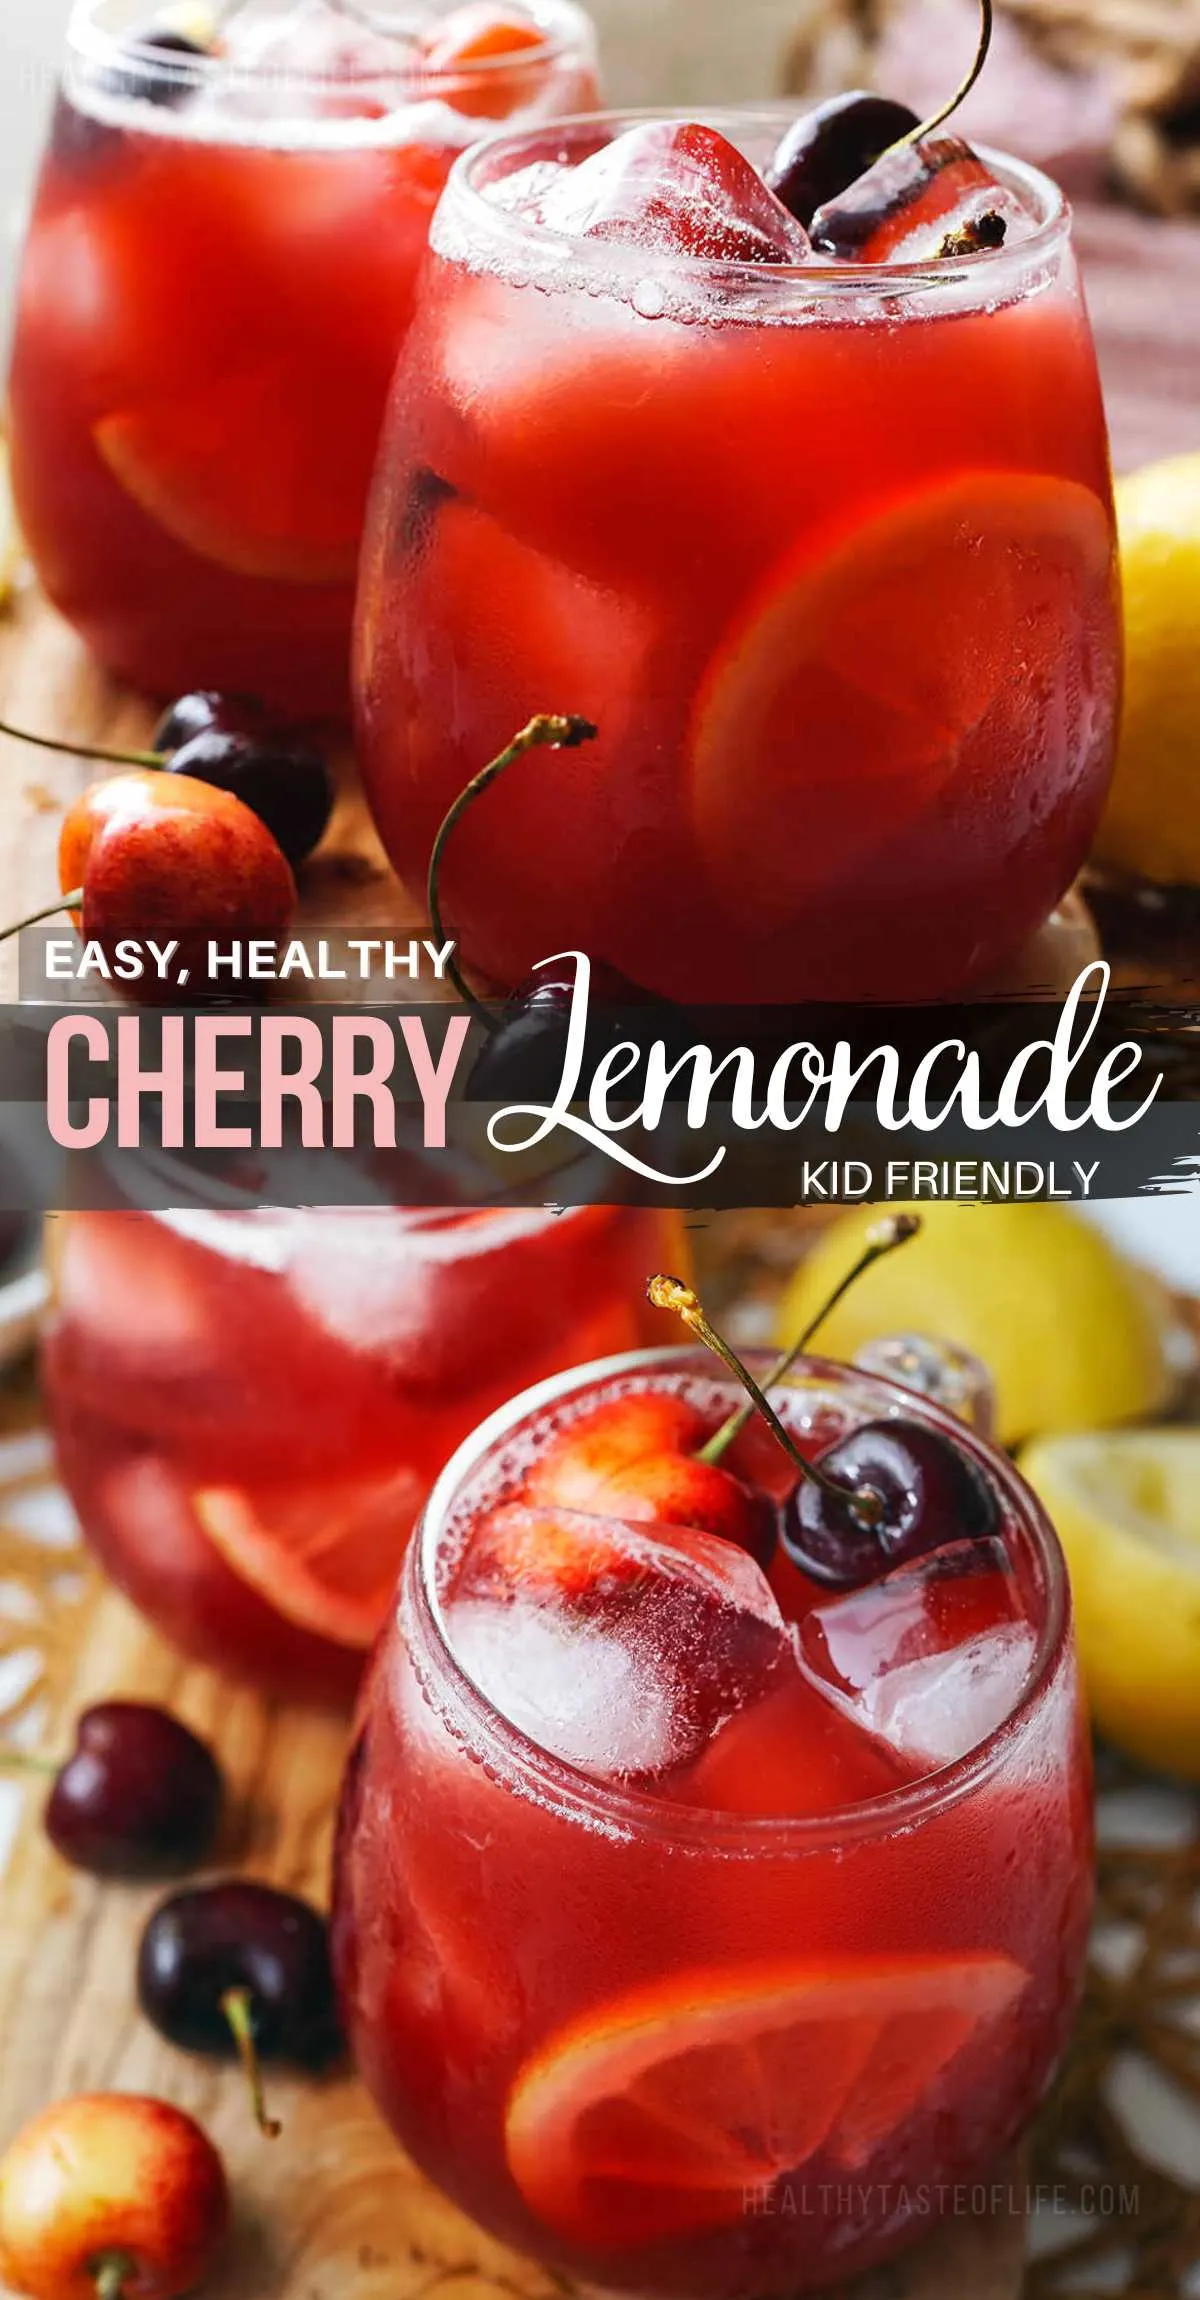 Relish the taste of summer with this easy fresh Cherry Lemonade Recipe. It combines freshly squeezed lemons and ripe cherries. This cherry lemonade is truly summer in a glass, perfectly balancing sweet and tart, it's the ideal thirst-quencher for hot days. Easy to make and adaptable, you either make the cherry juice yourself or use a bottles black or tart cherry juice. #cherrylemonade #cherry #lemonade #recipe #summer #drink